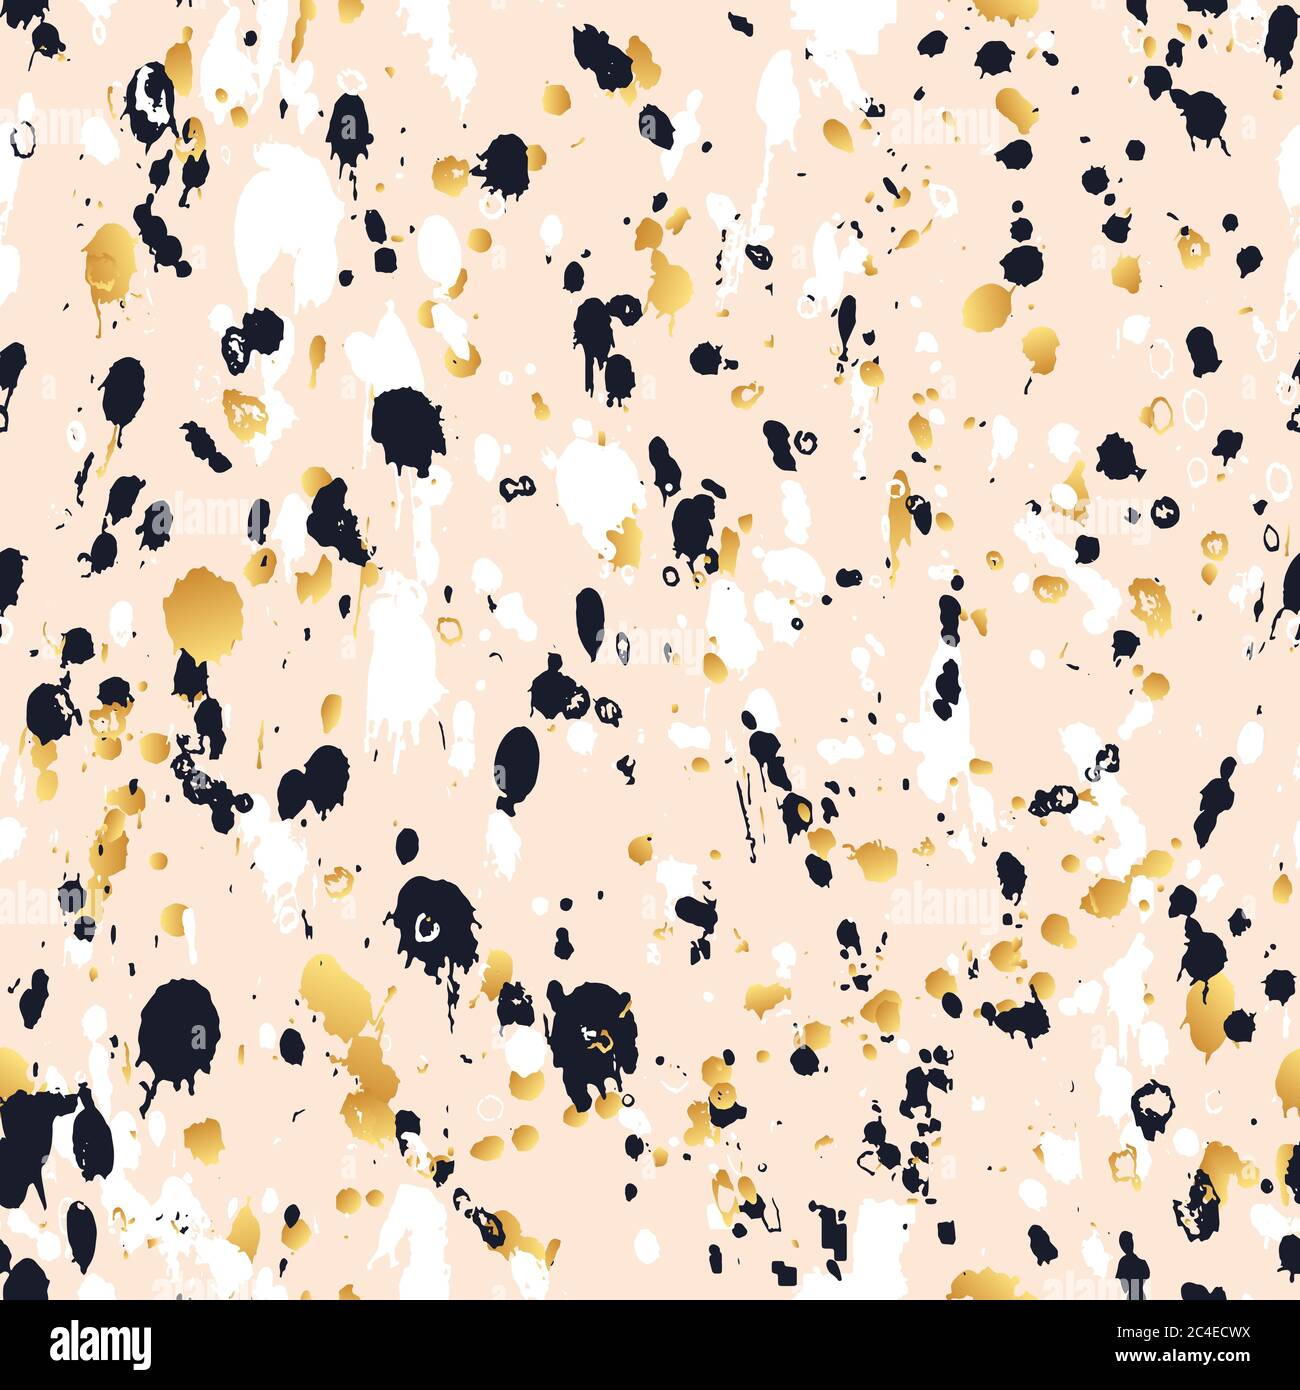 Abstract watercolor paint splashes vector seamless pattern. Art ink texture background in blush pink, gold, black white colors. Hand drawn fabric Stock Vector